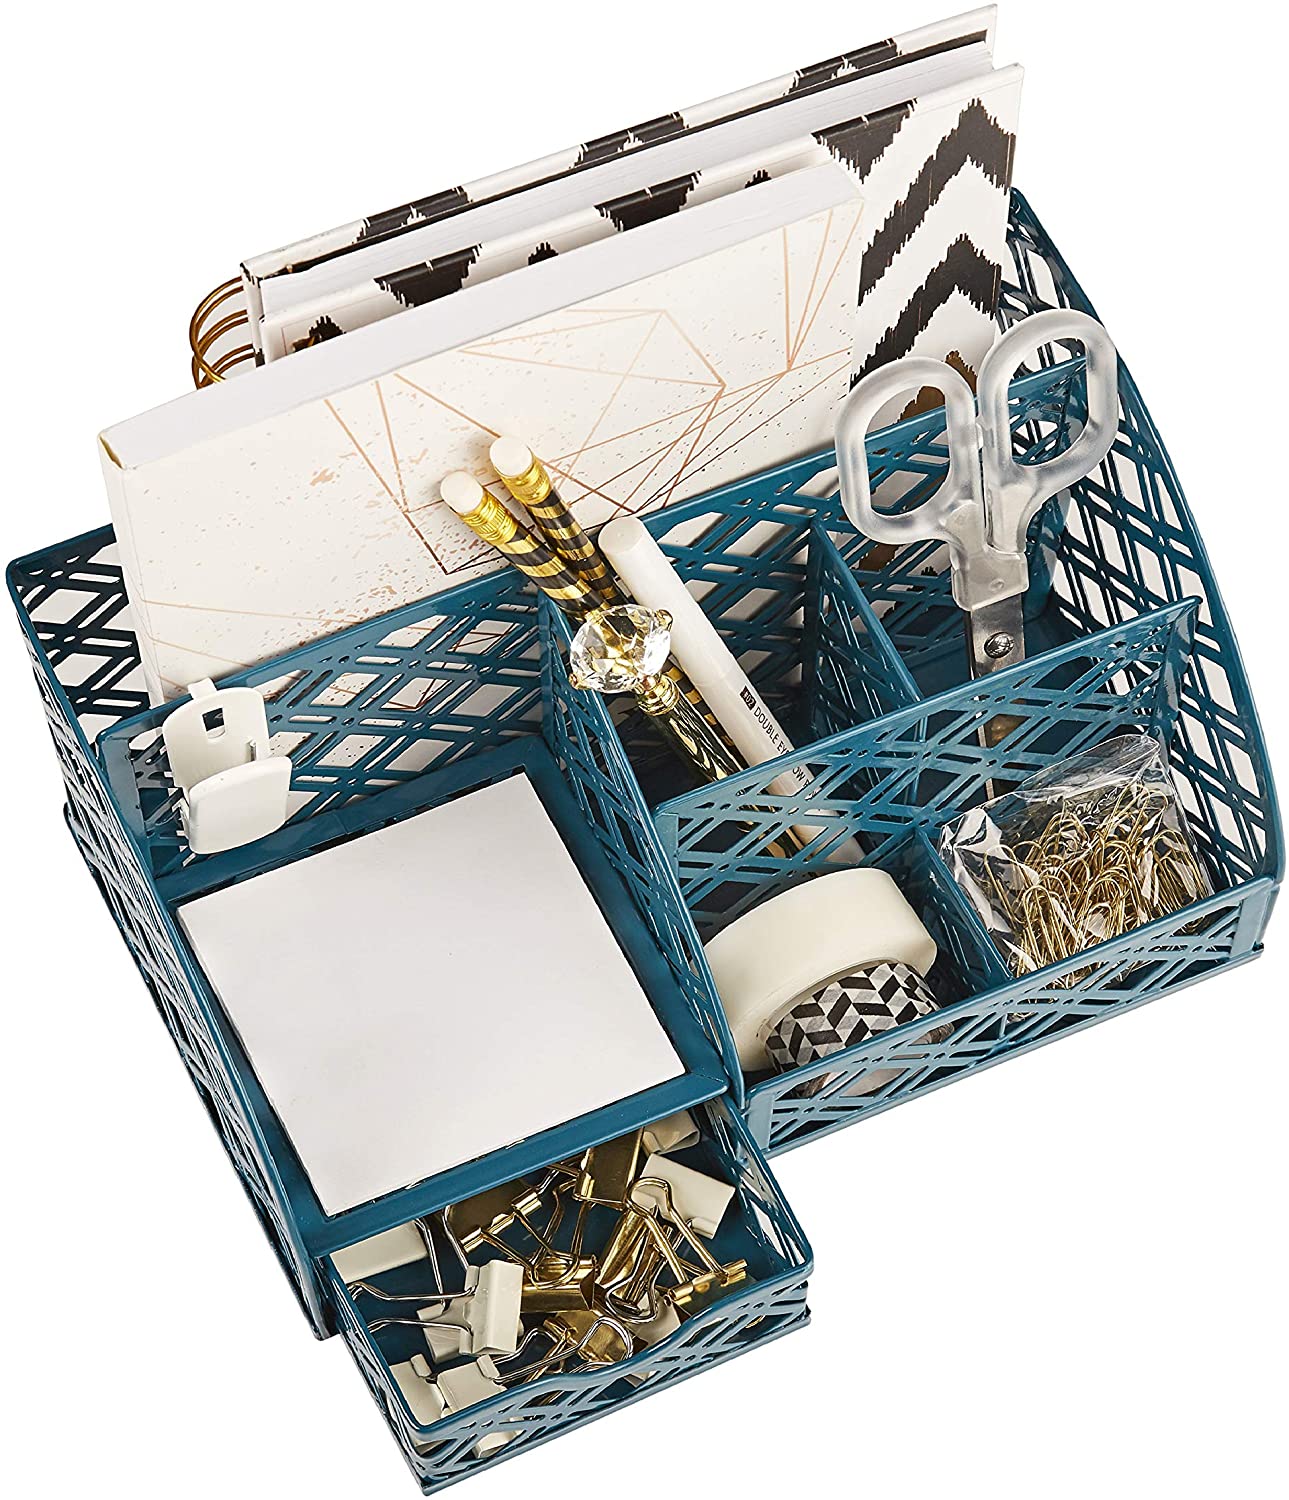 EXERZ Desk Organiser with 7 Compartments -Mesh Desk Tidy Caddy - Aegean Blue